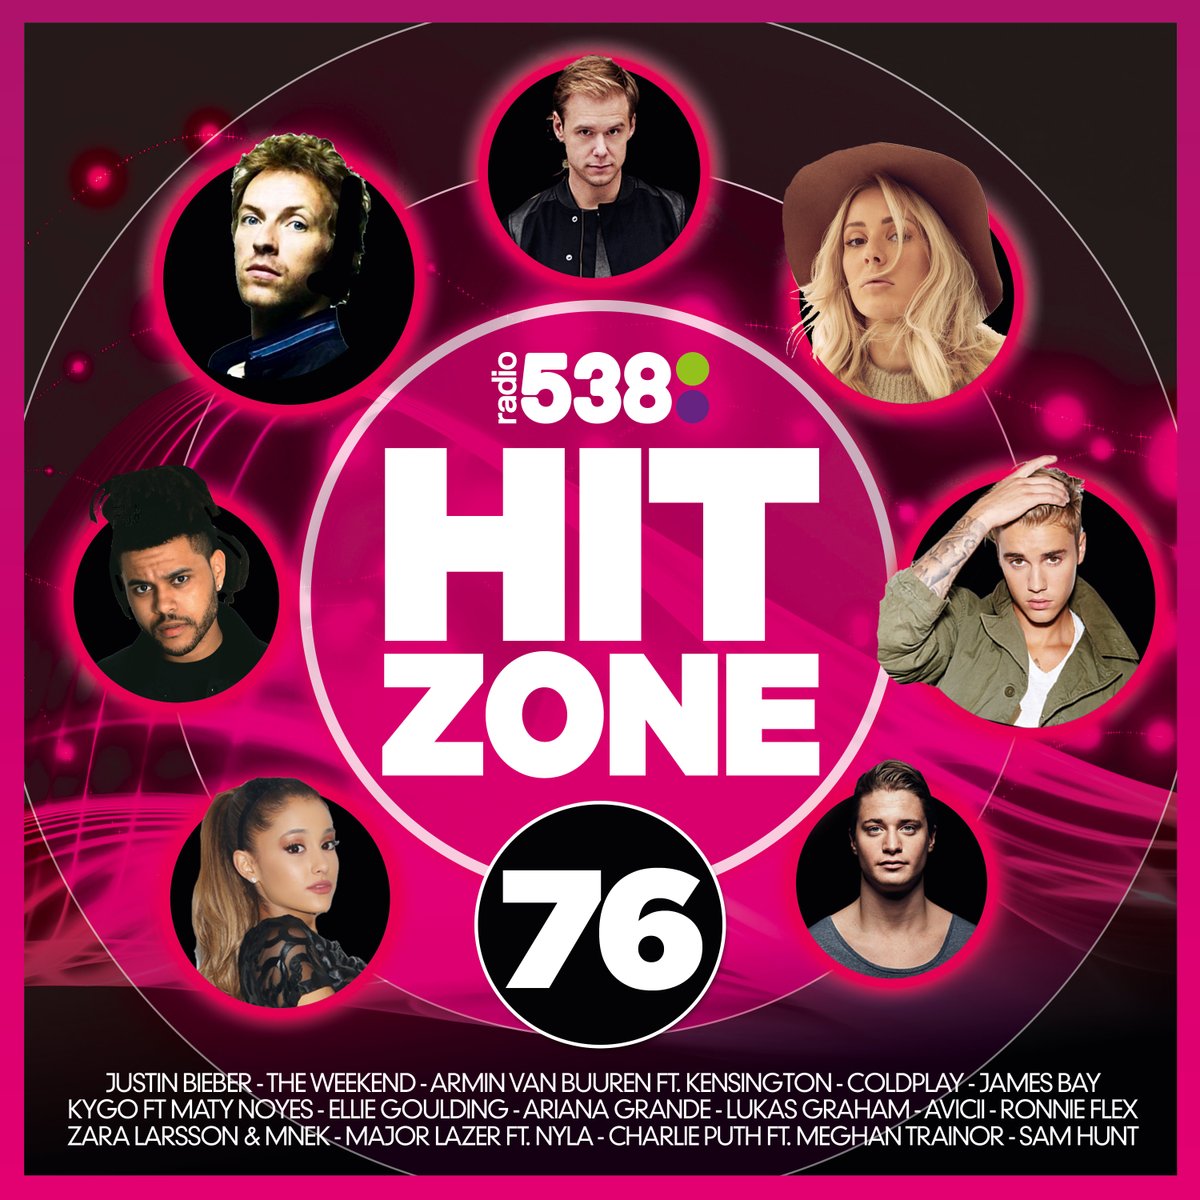 Release “Radio Hitzone 76” by Artists - Cover Art -